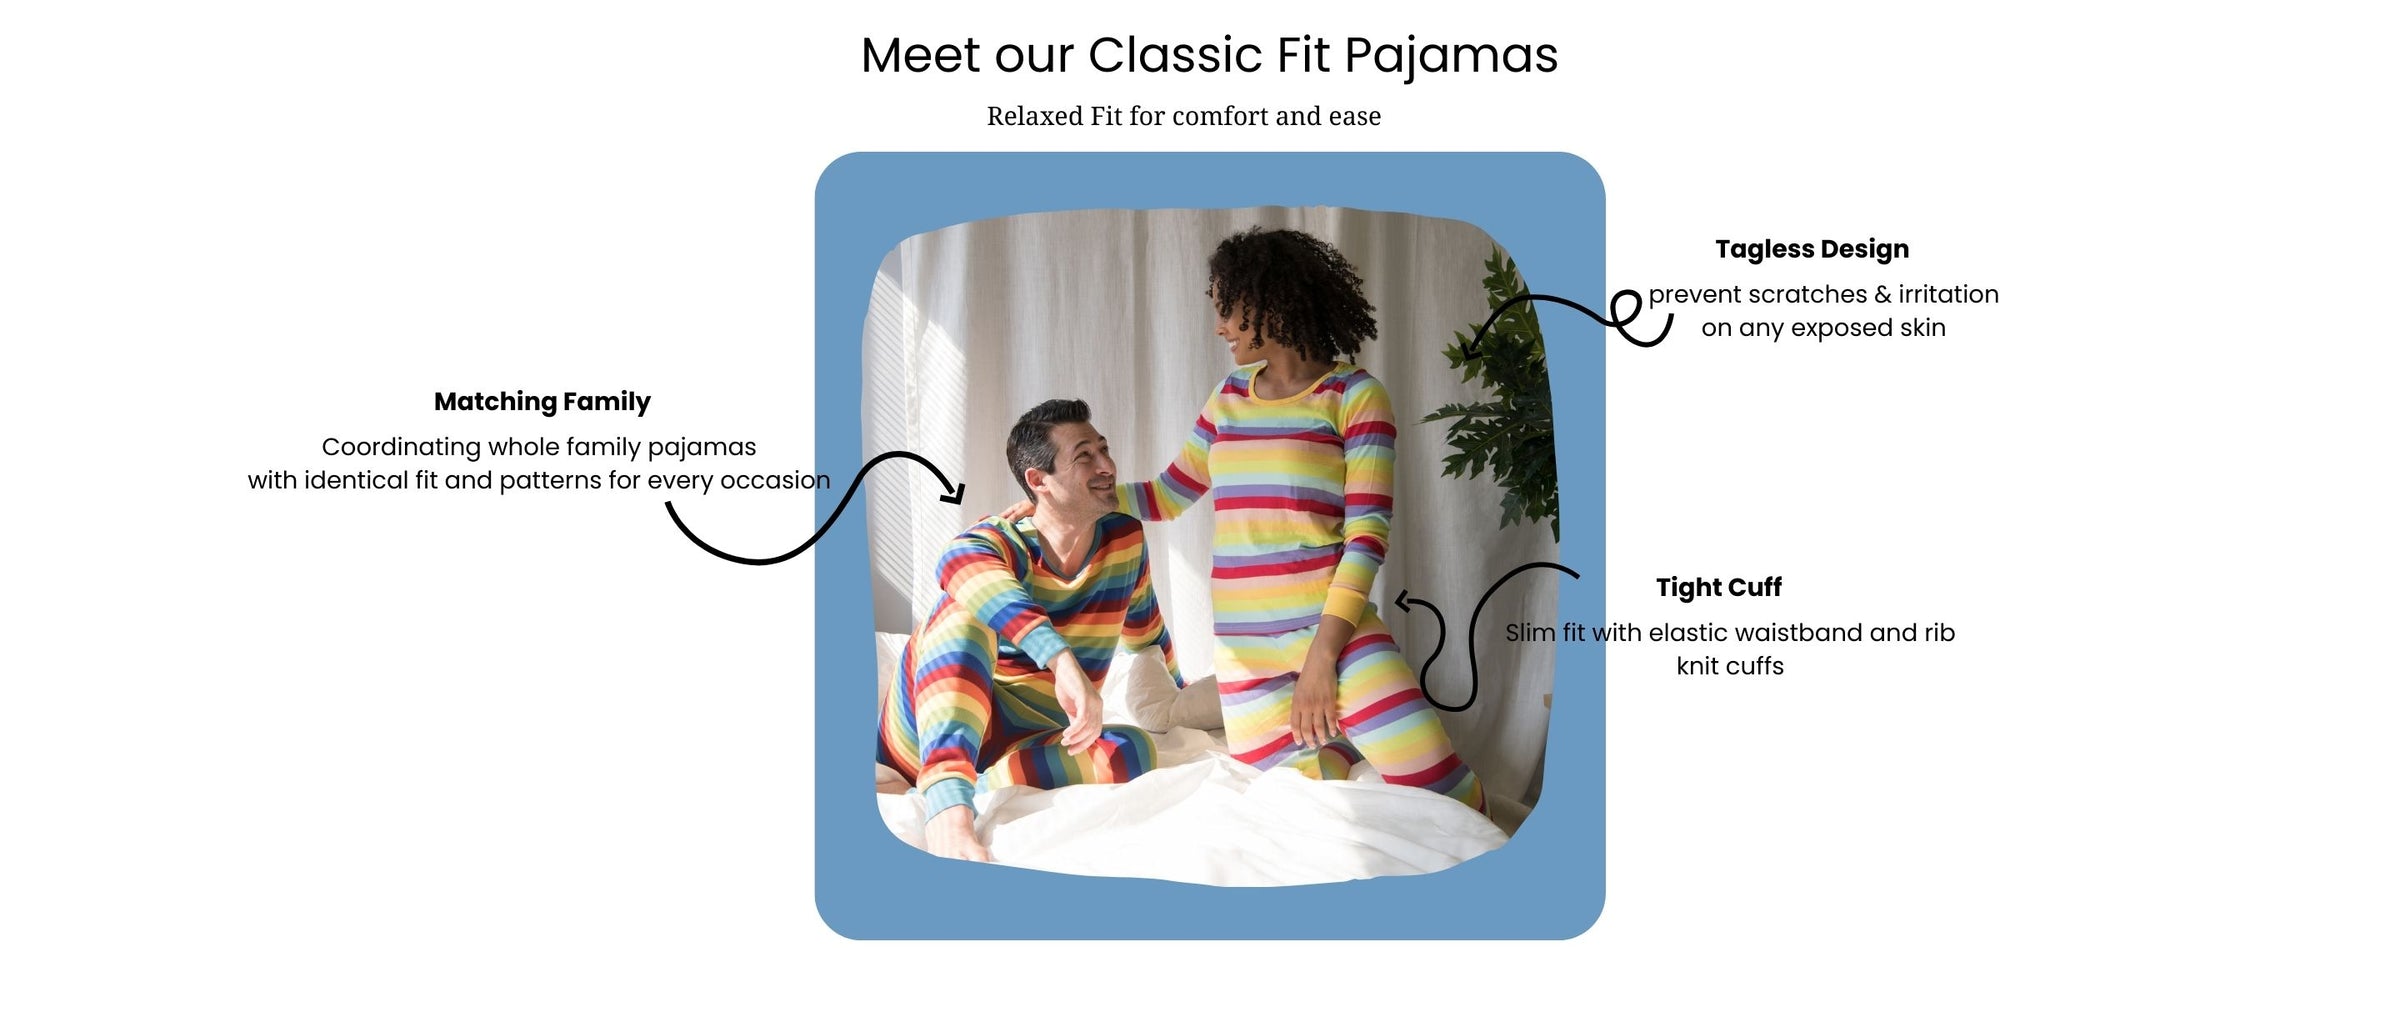 Meet our Classic fit pajamas, woman and man wearing rainbow striped pajamas